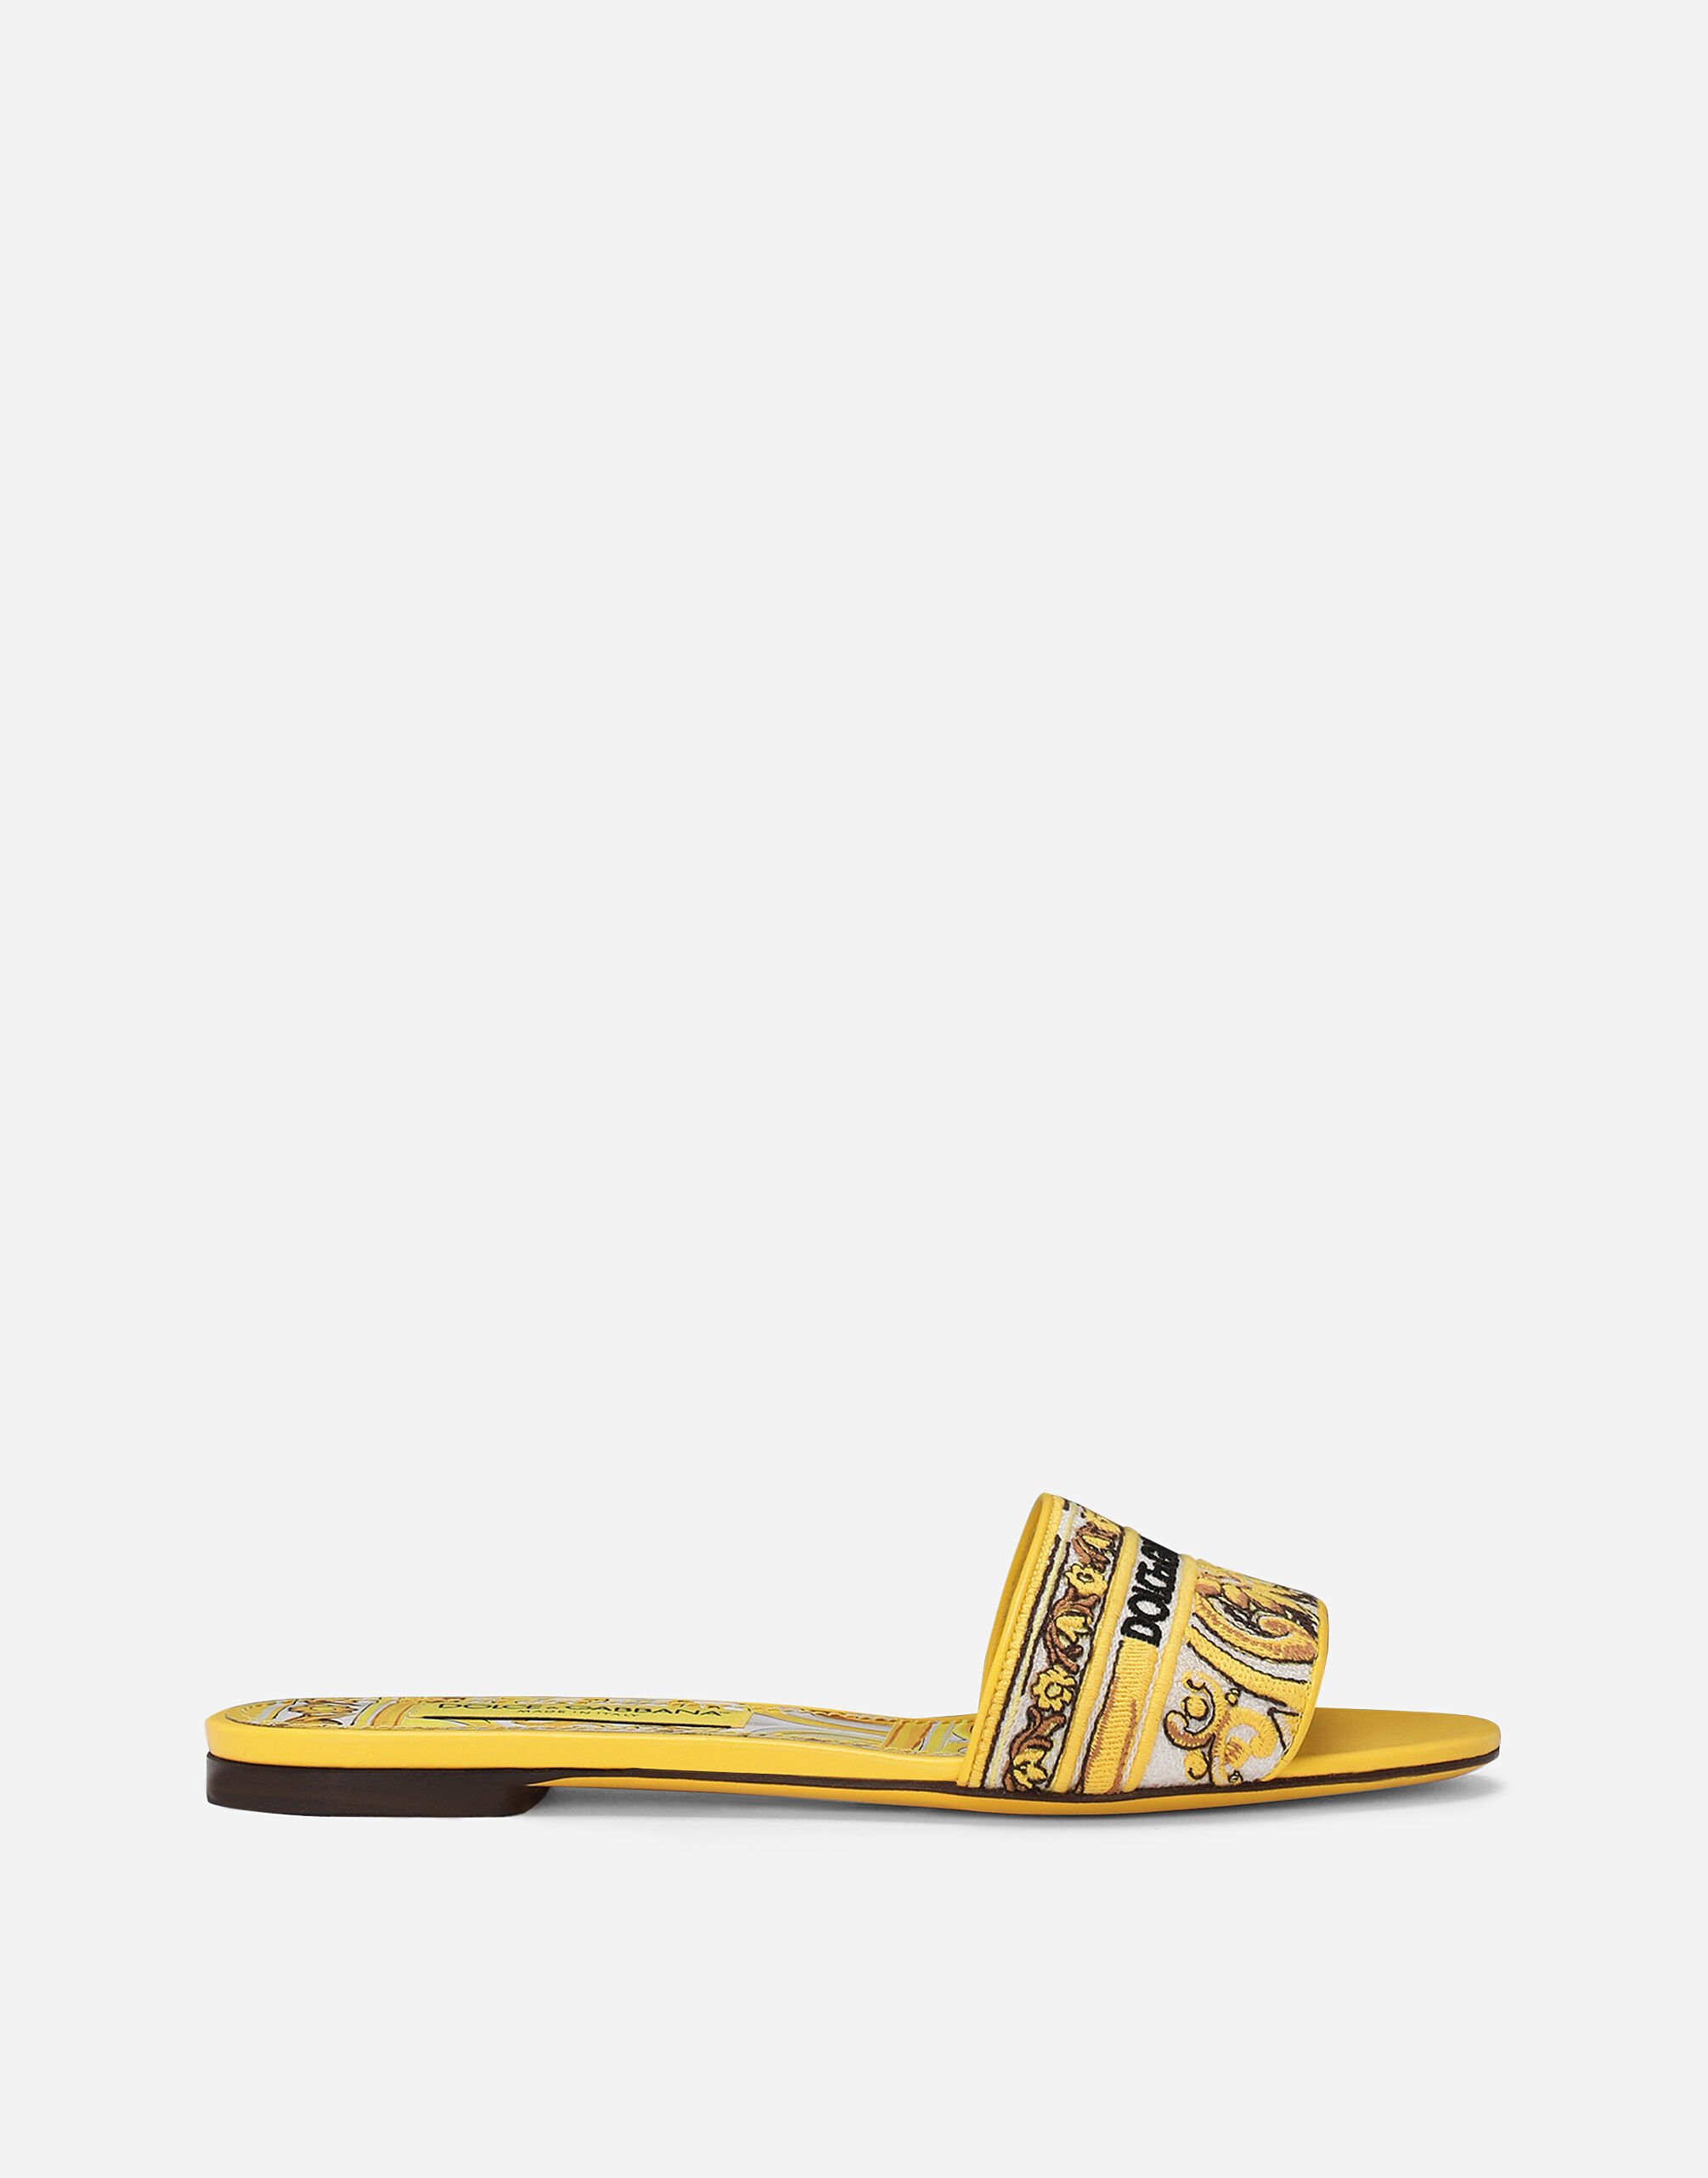 Dolce & Gabbana Sliders with embroidered majolica pattern Print VH0001VH000